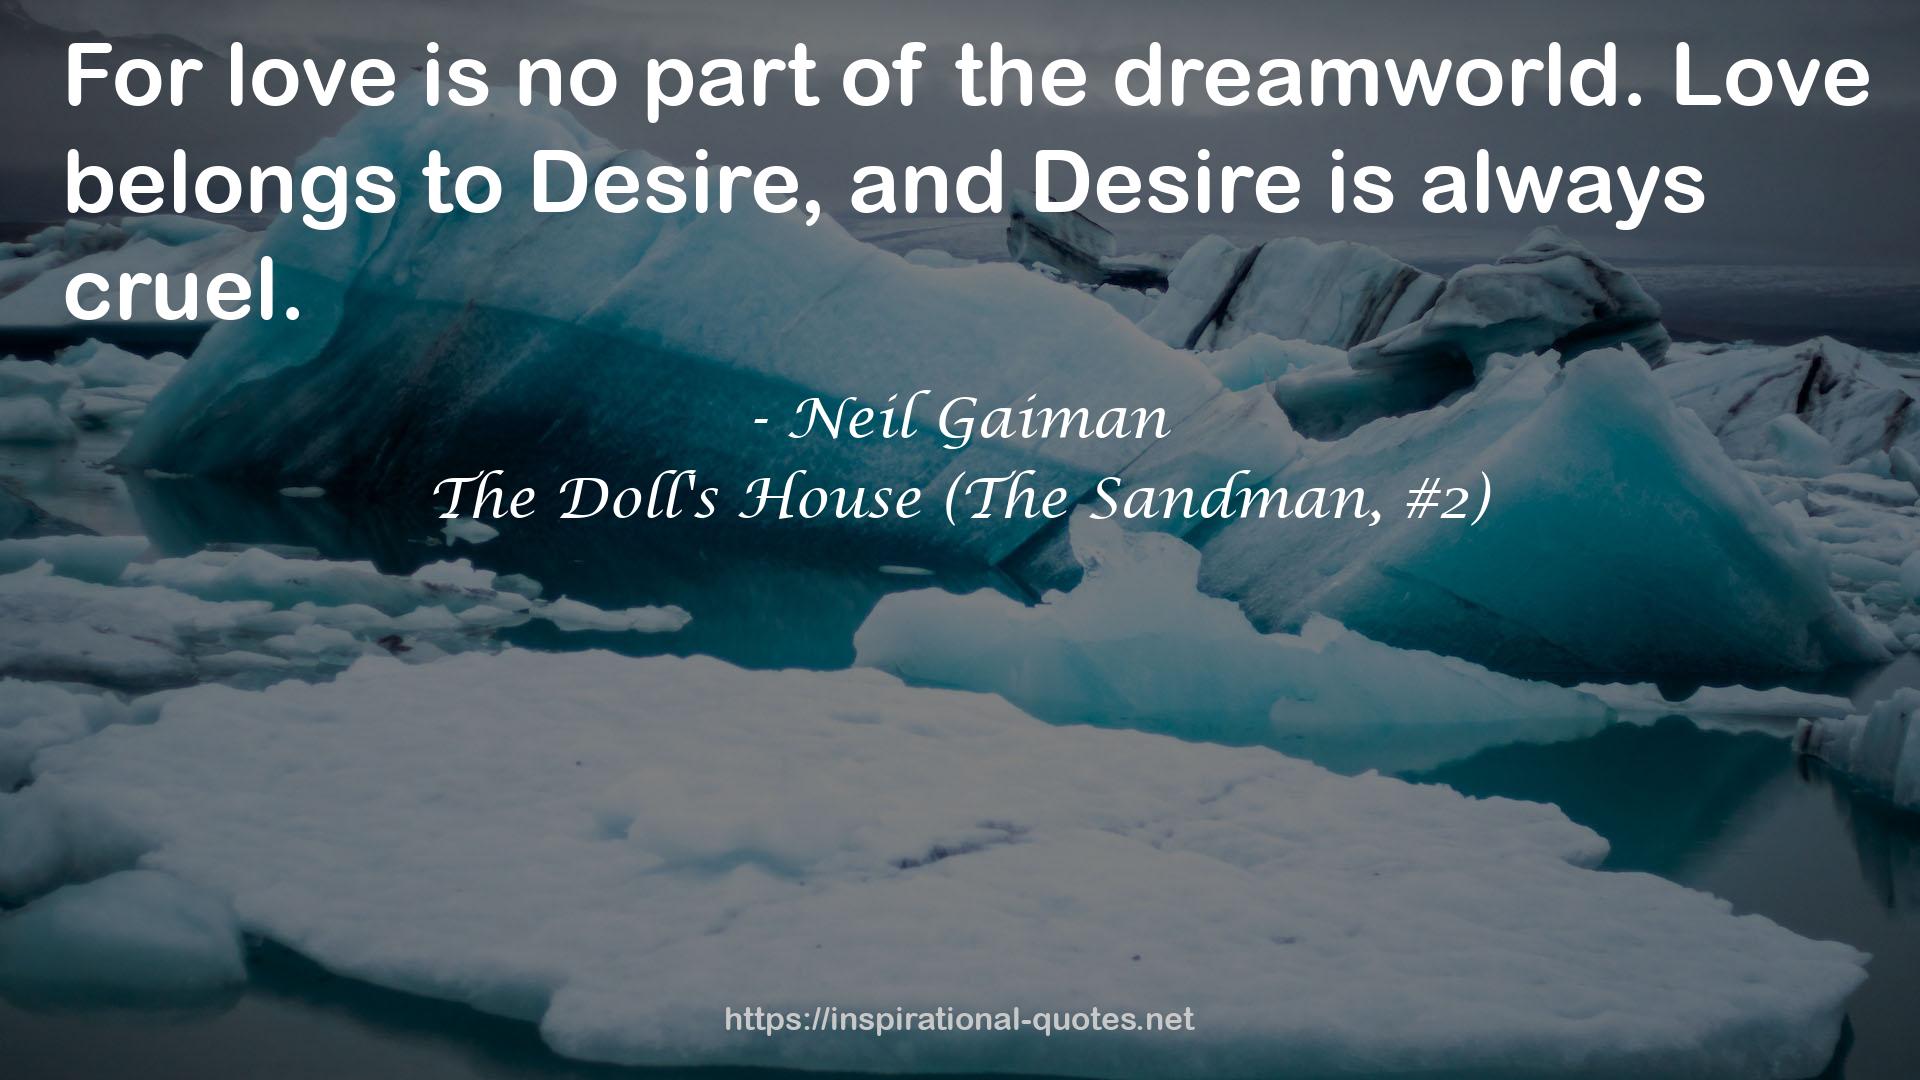 The Doll's House (The Sandman, #2) QUOTES